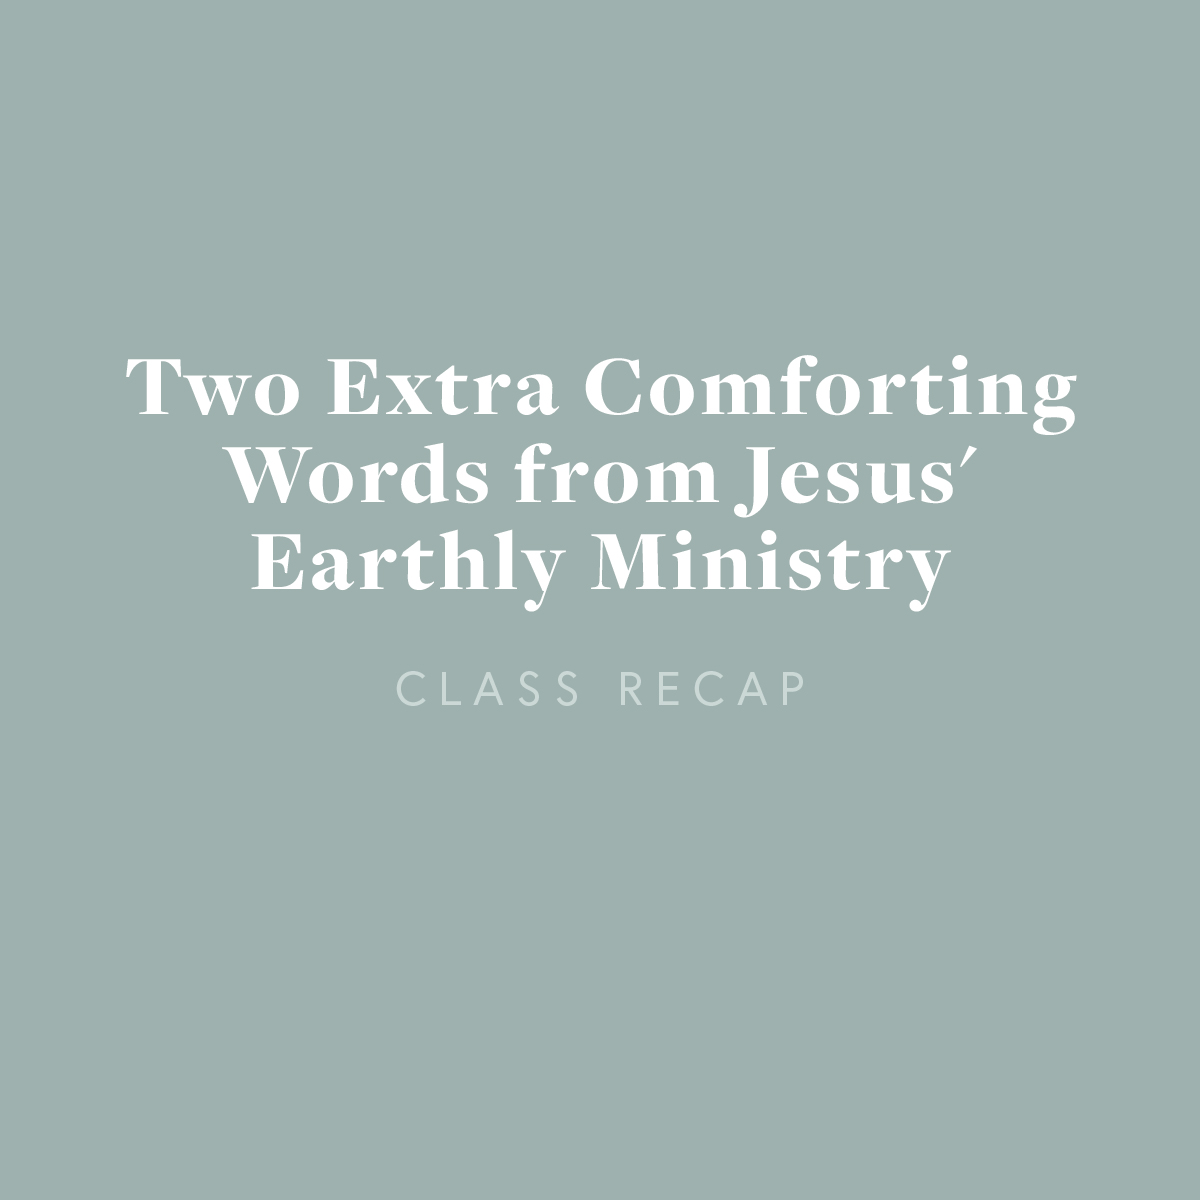 Two Extra Comforting Words from Jesus’ Earthly Ministry